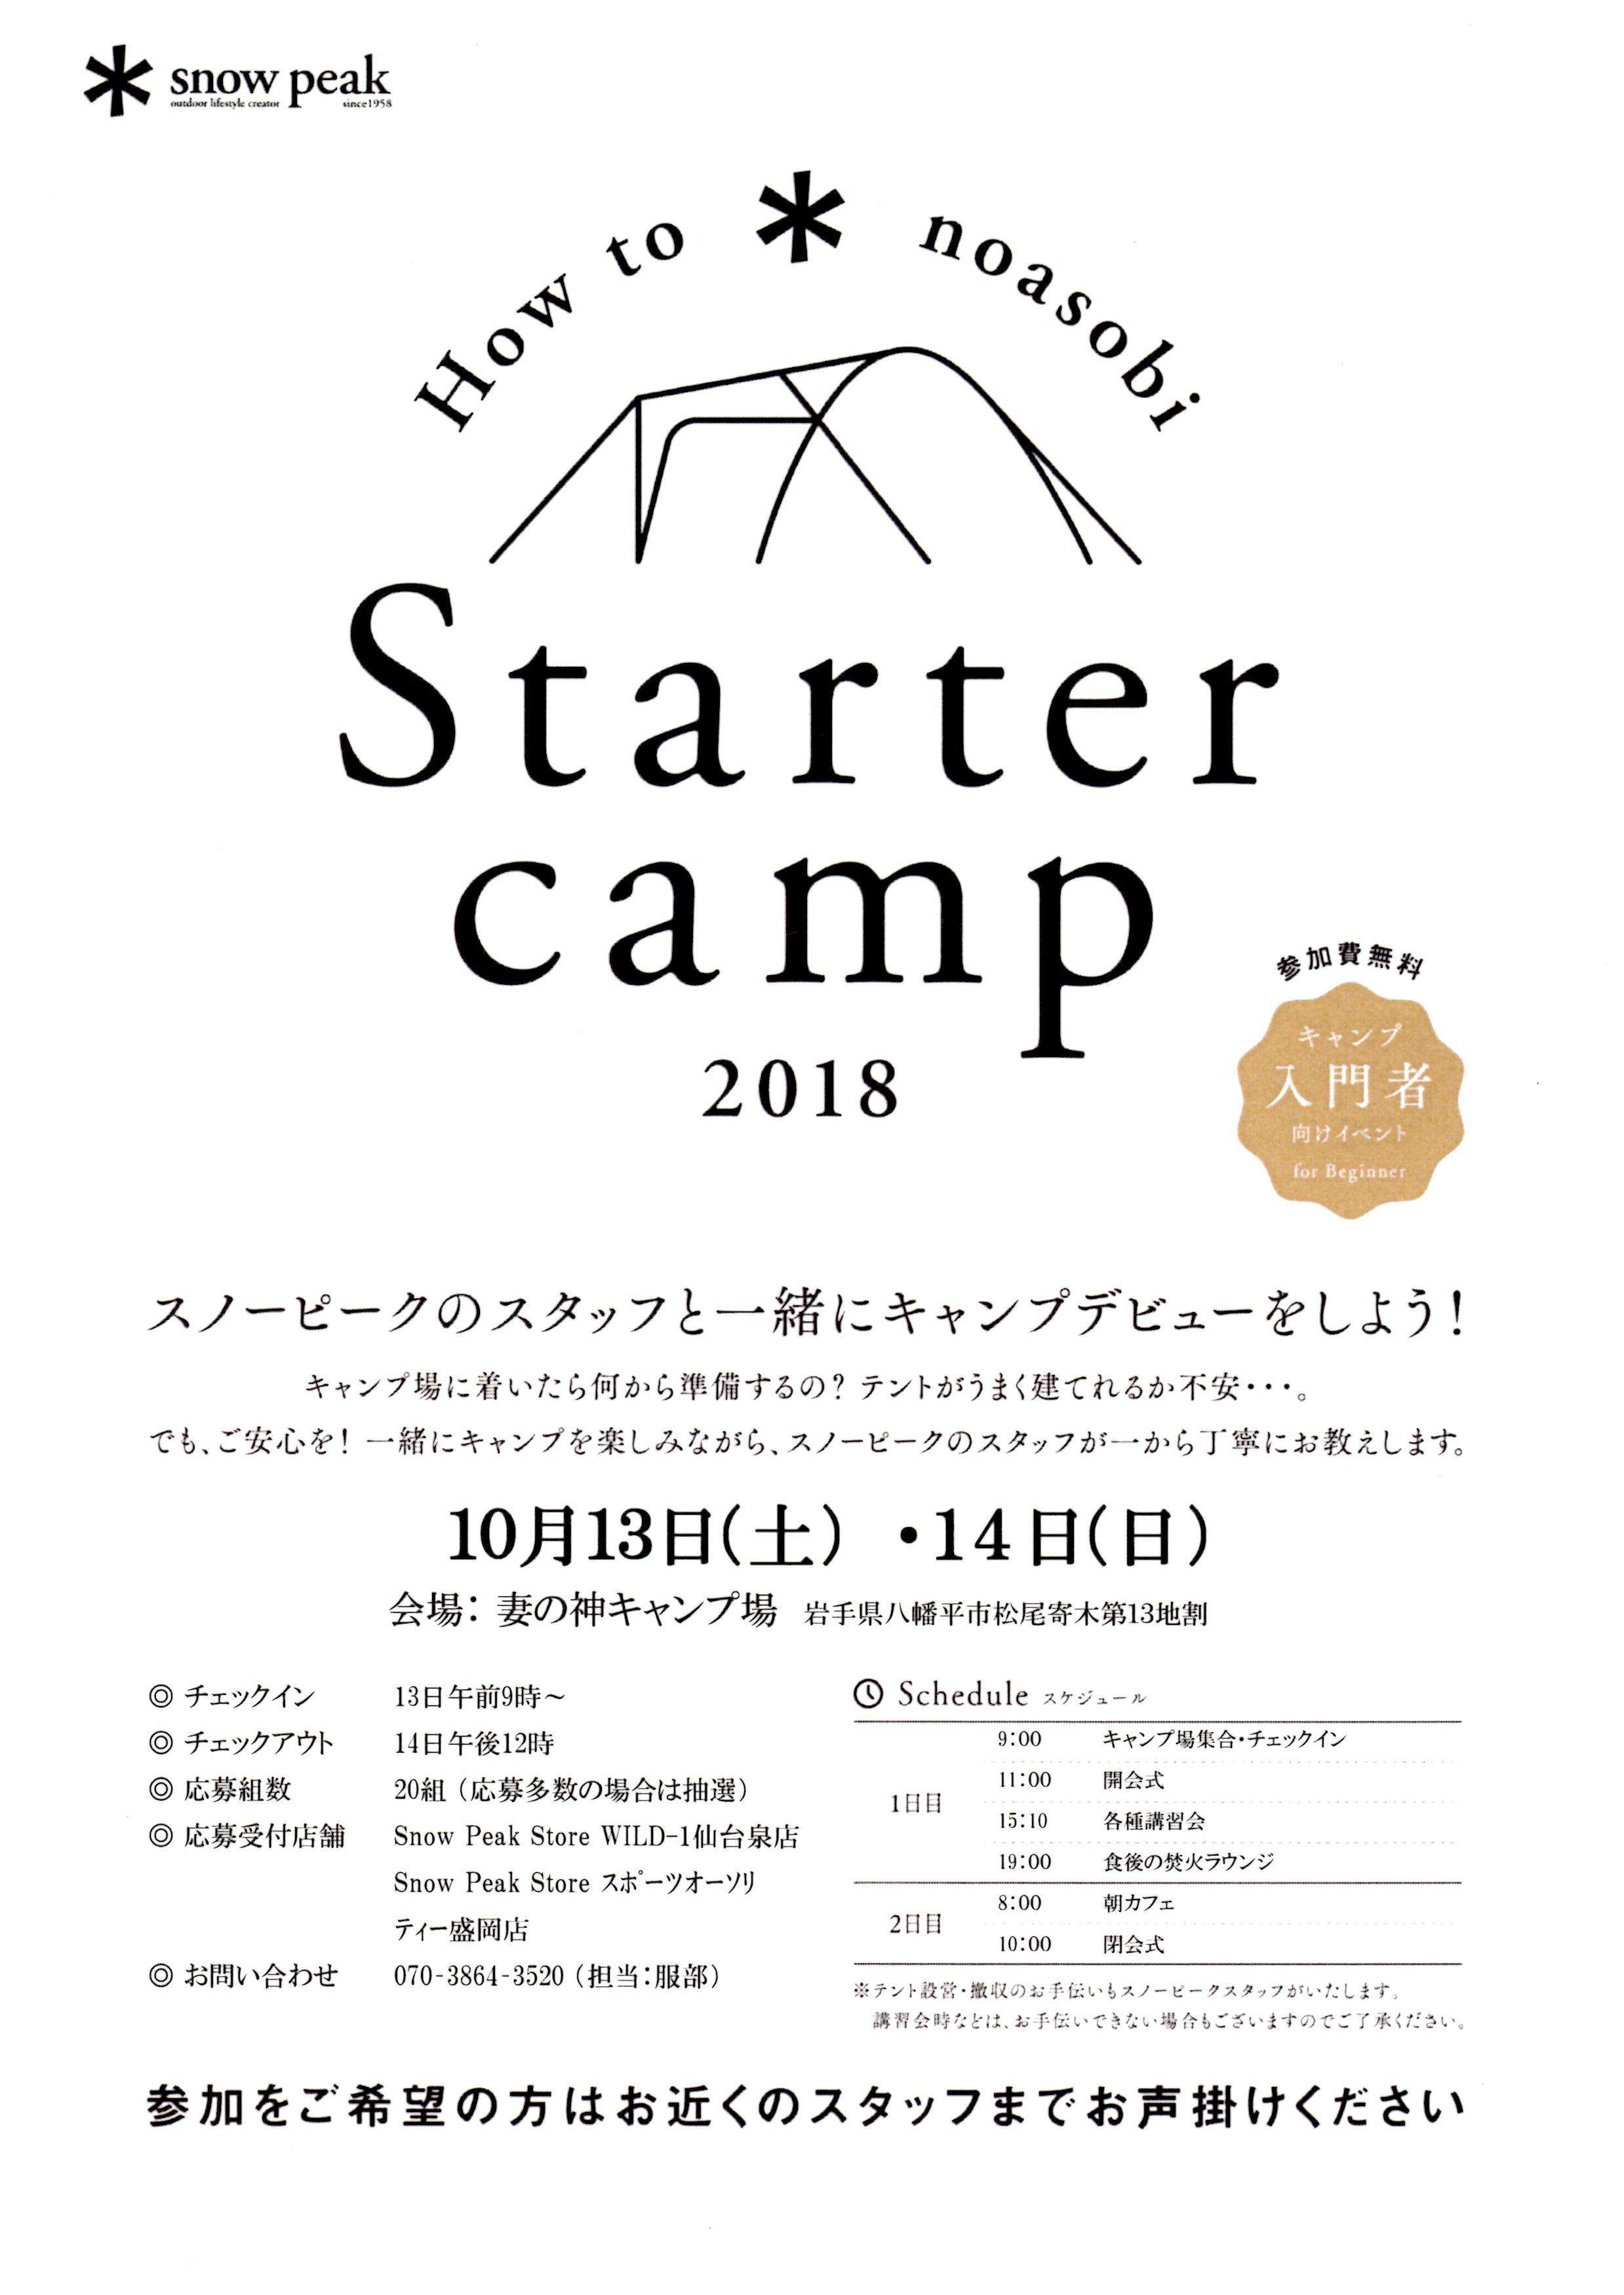 ＊ Stater Camp 2018 ＊ 